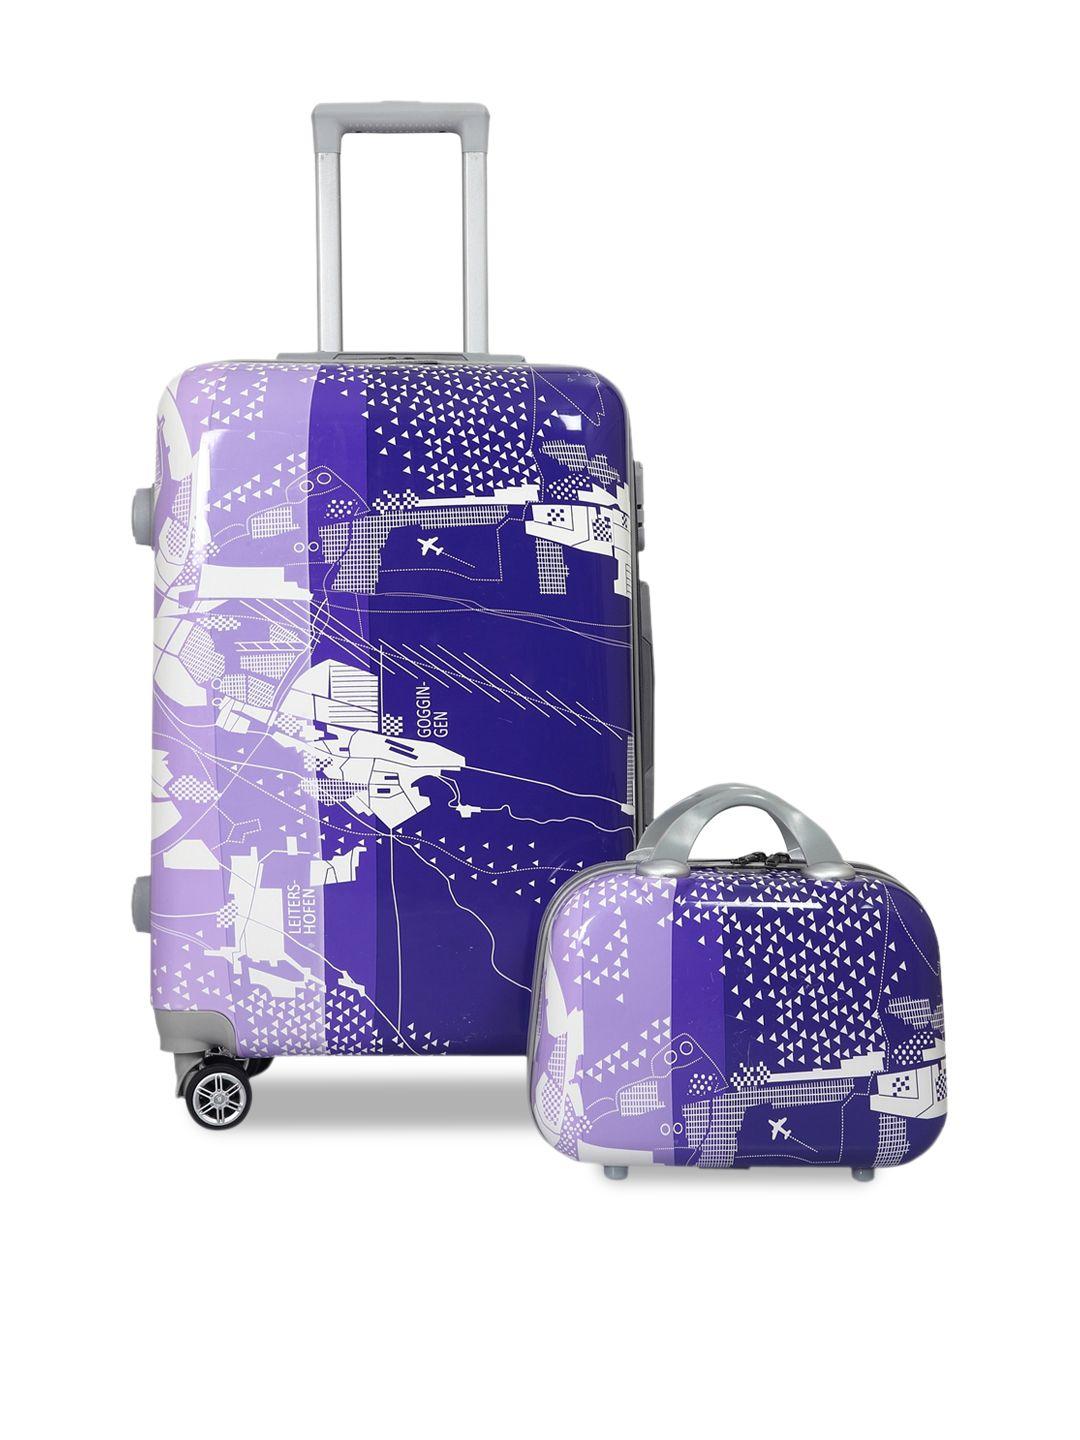 polo class blue & purple 24 inch trolley bag with 1 vanity bag